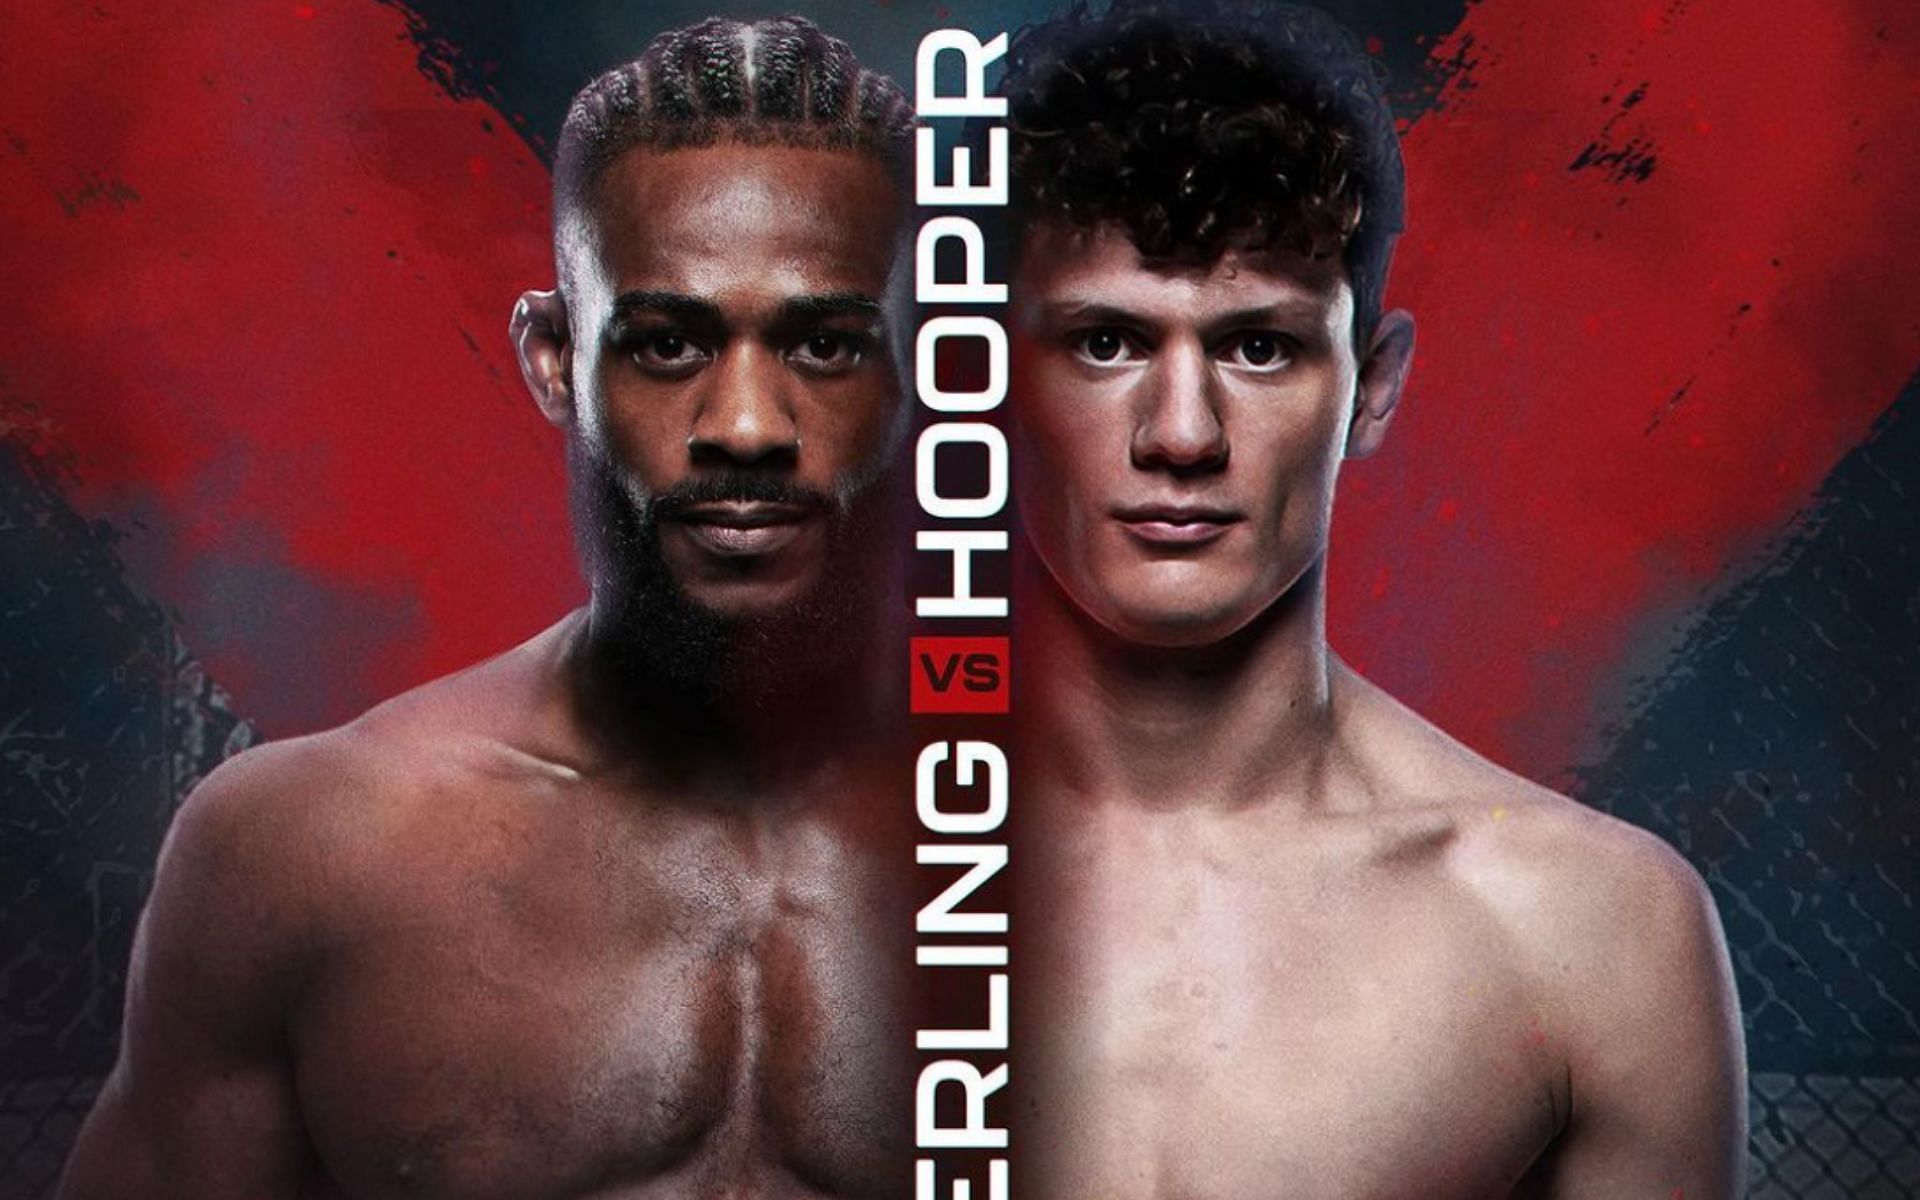 ADXC 2 event poster featuring Aljamain Sterling and Chase Hooper [Photo Courtesy @adxcofficial on Instagram]